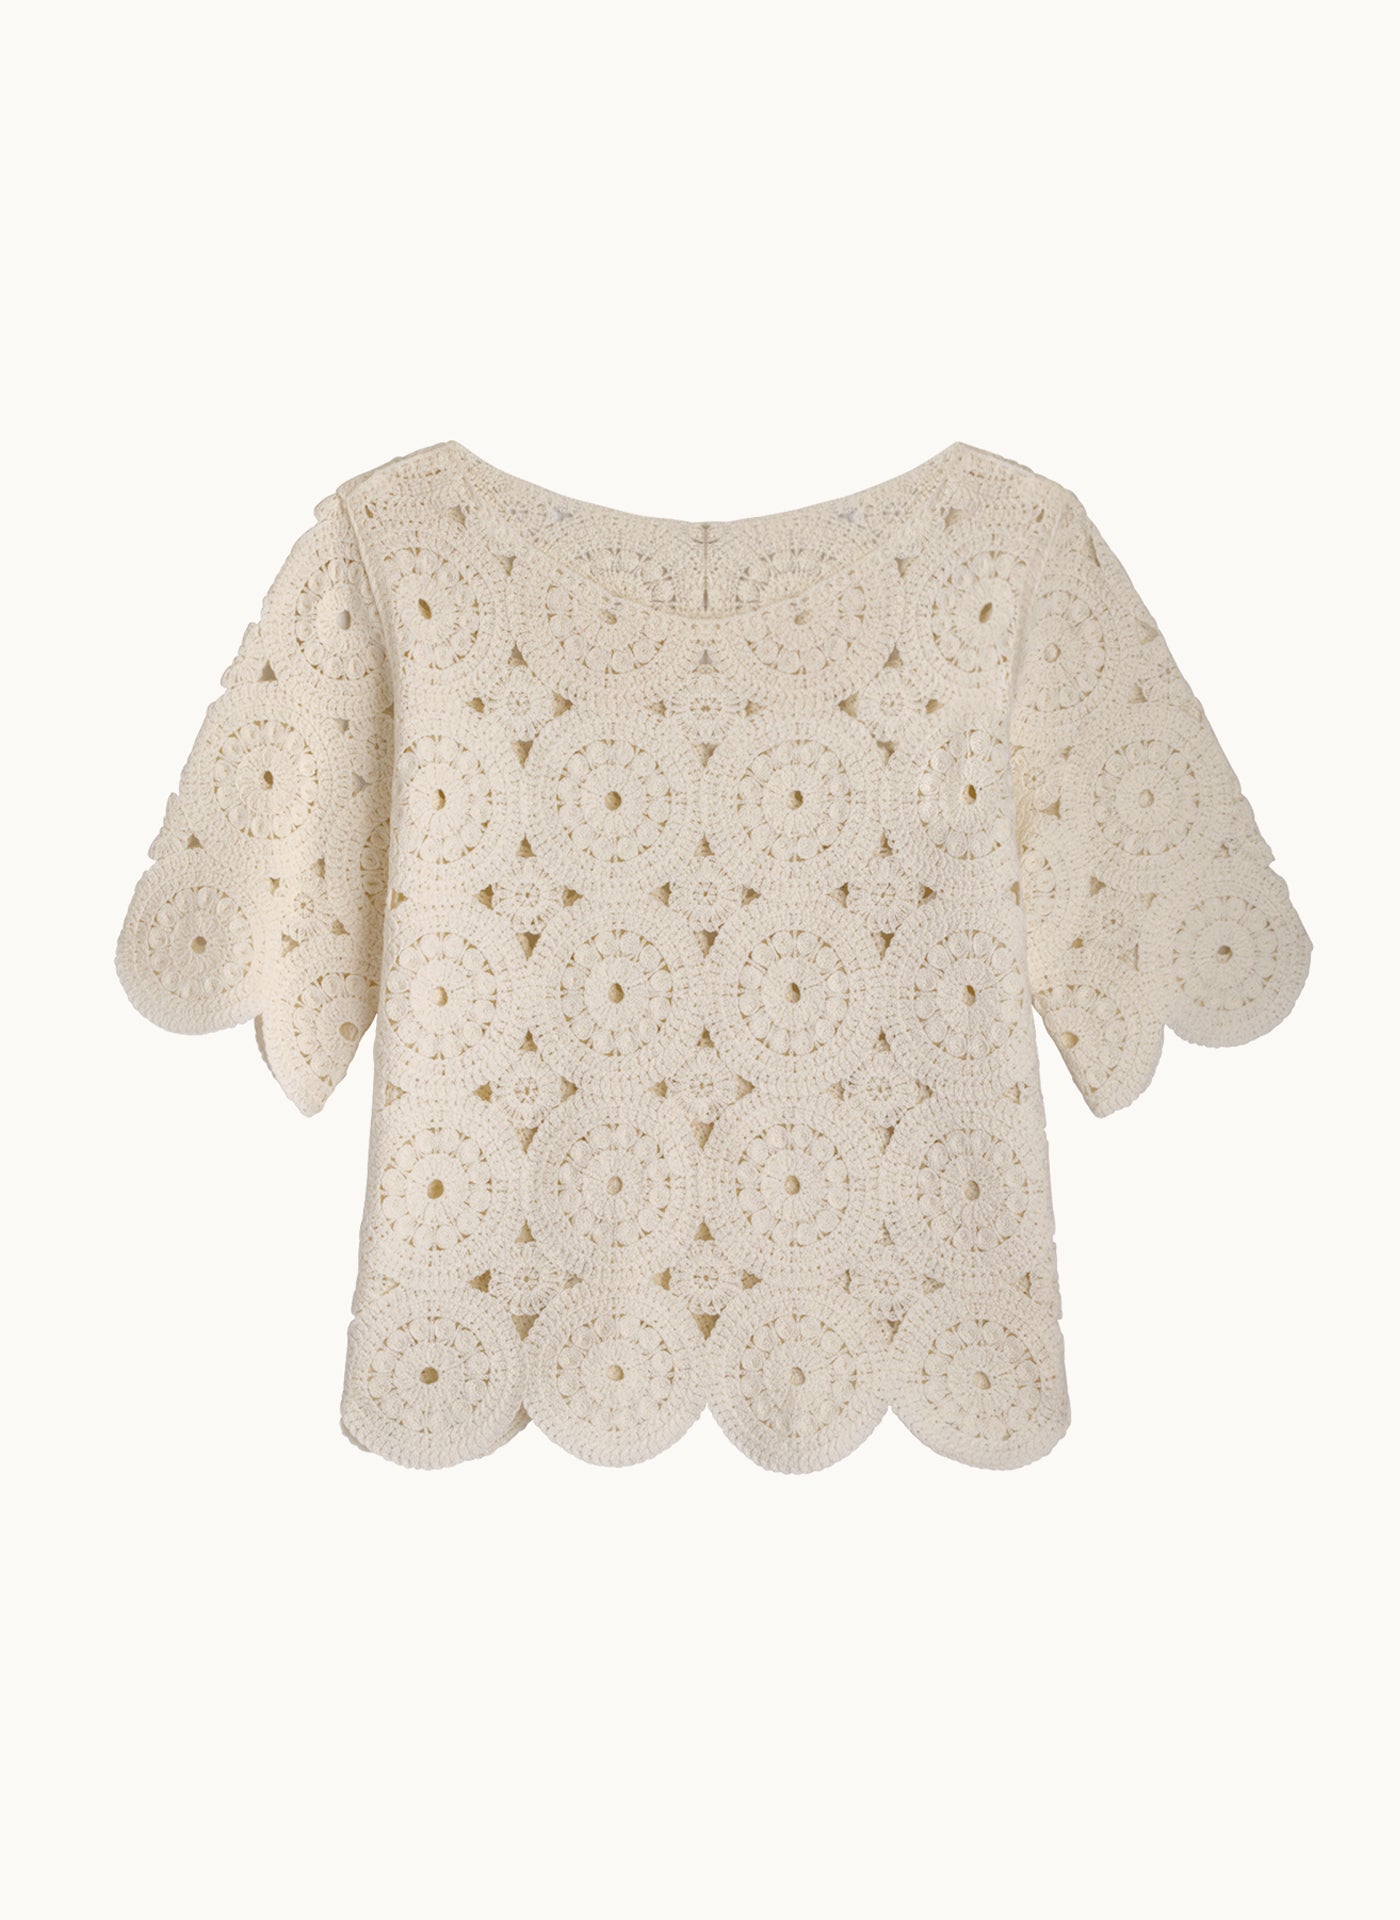 CROCHET SWEATER WITH SEQUIN